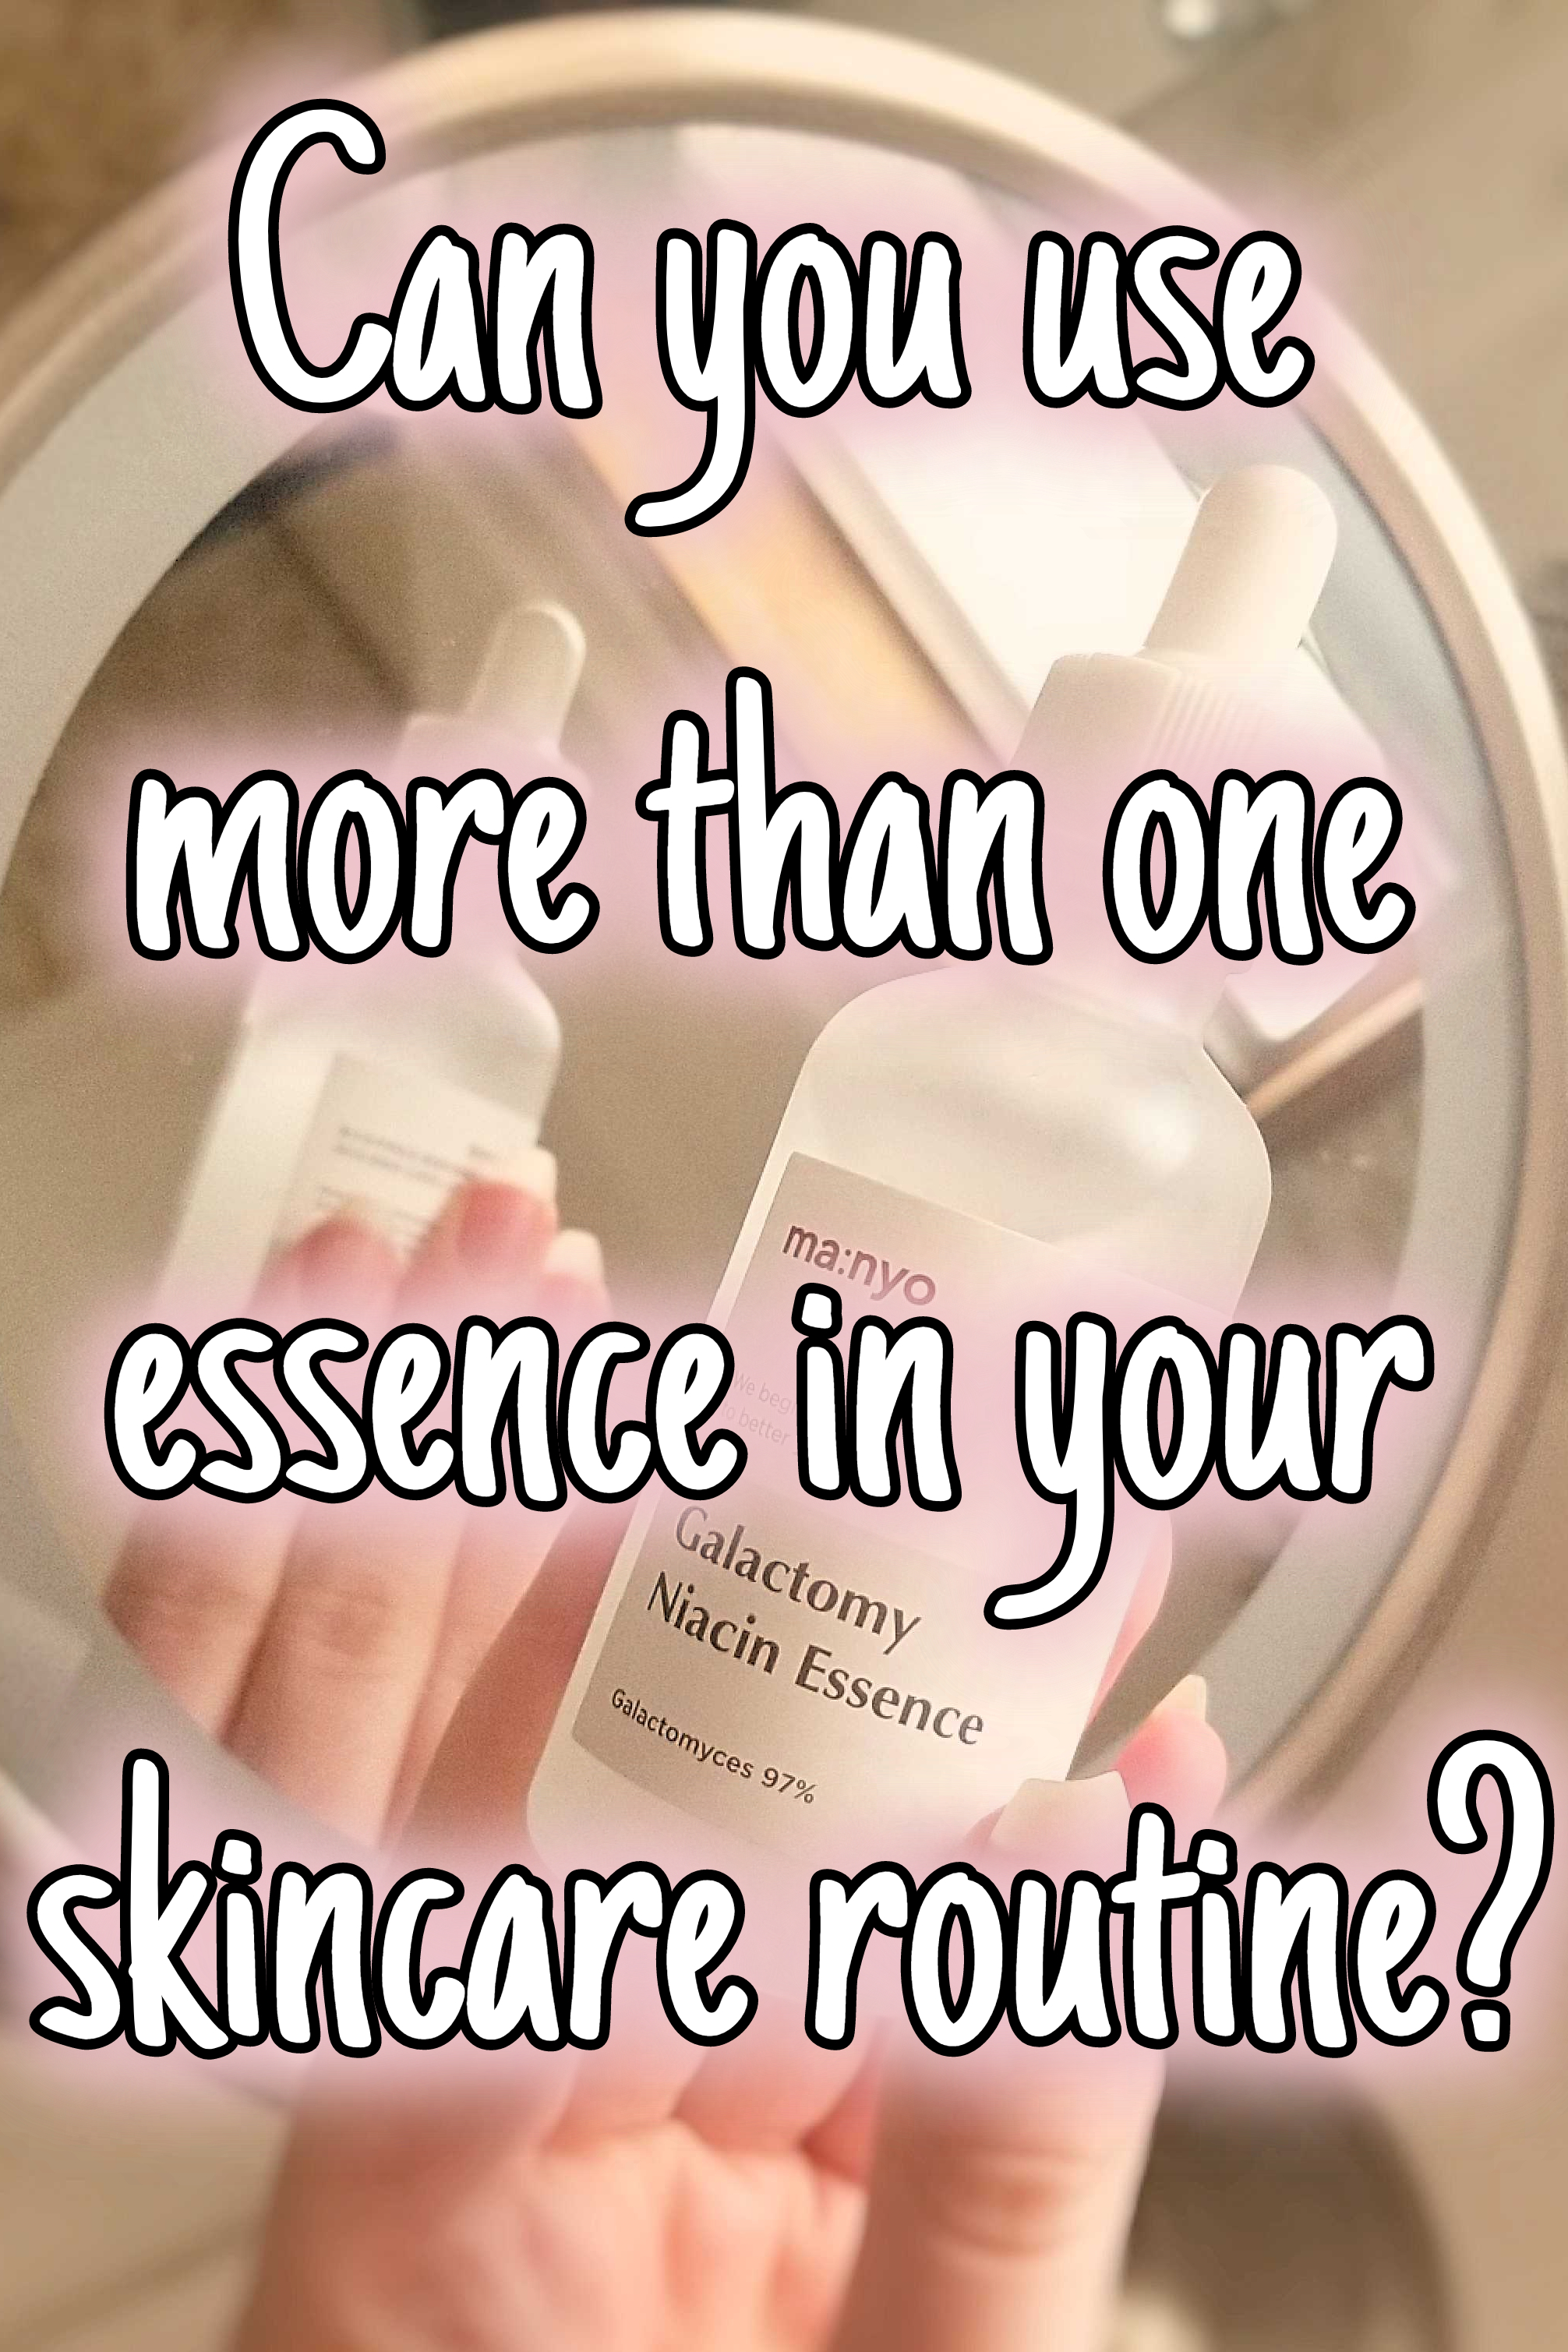 Here's how to use more than one essence at a time in your skincare routine!